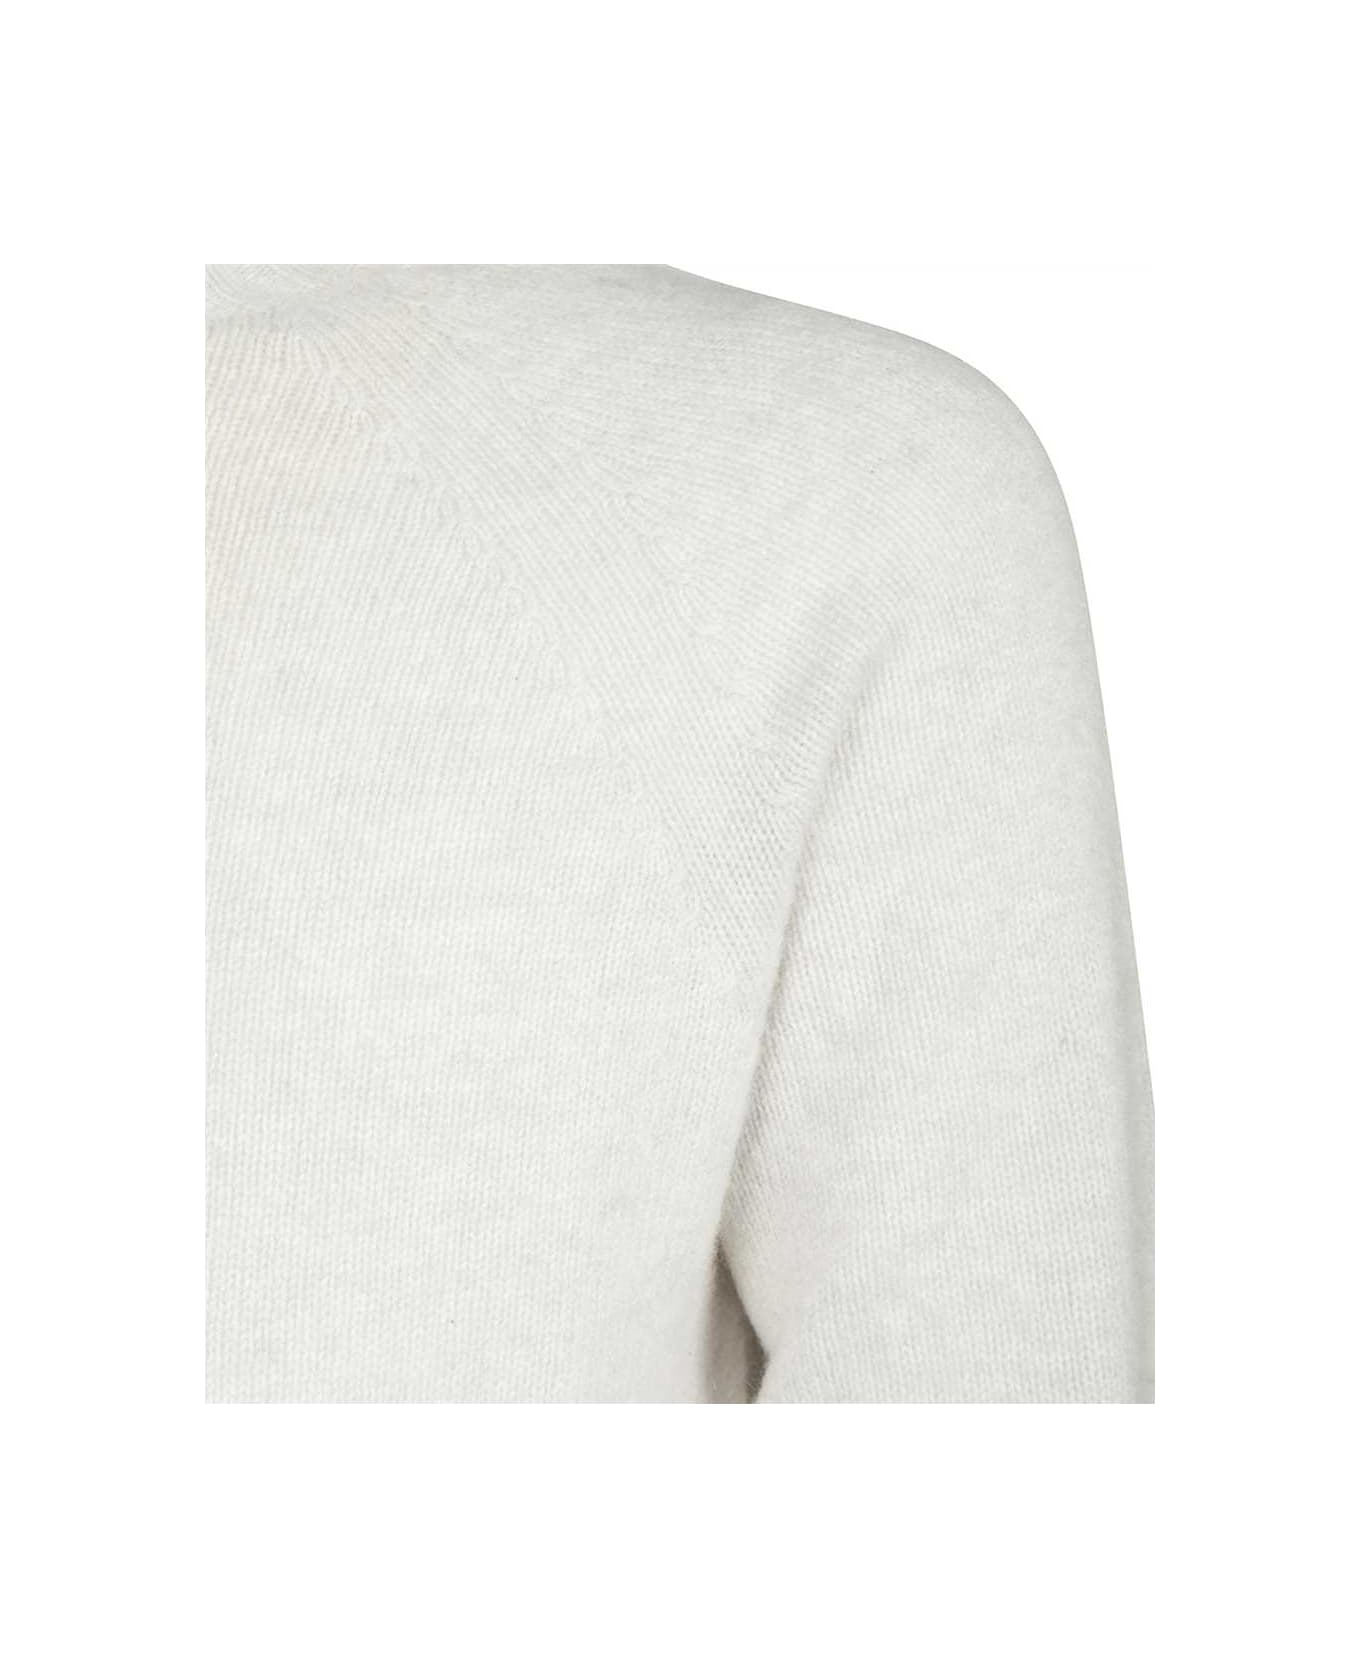 Tom Ford Cashmere Crew-neck Sweater - grey